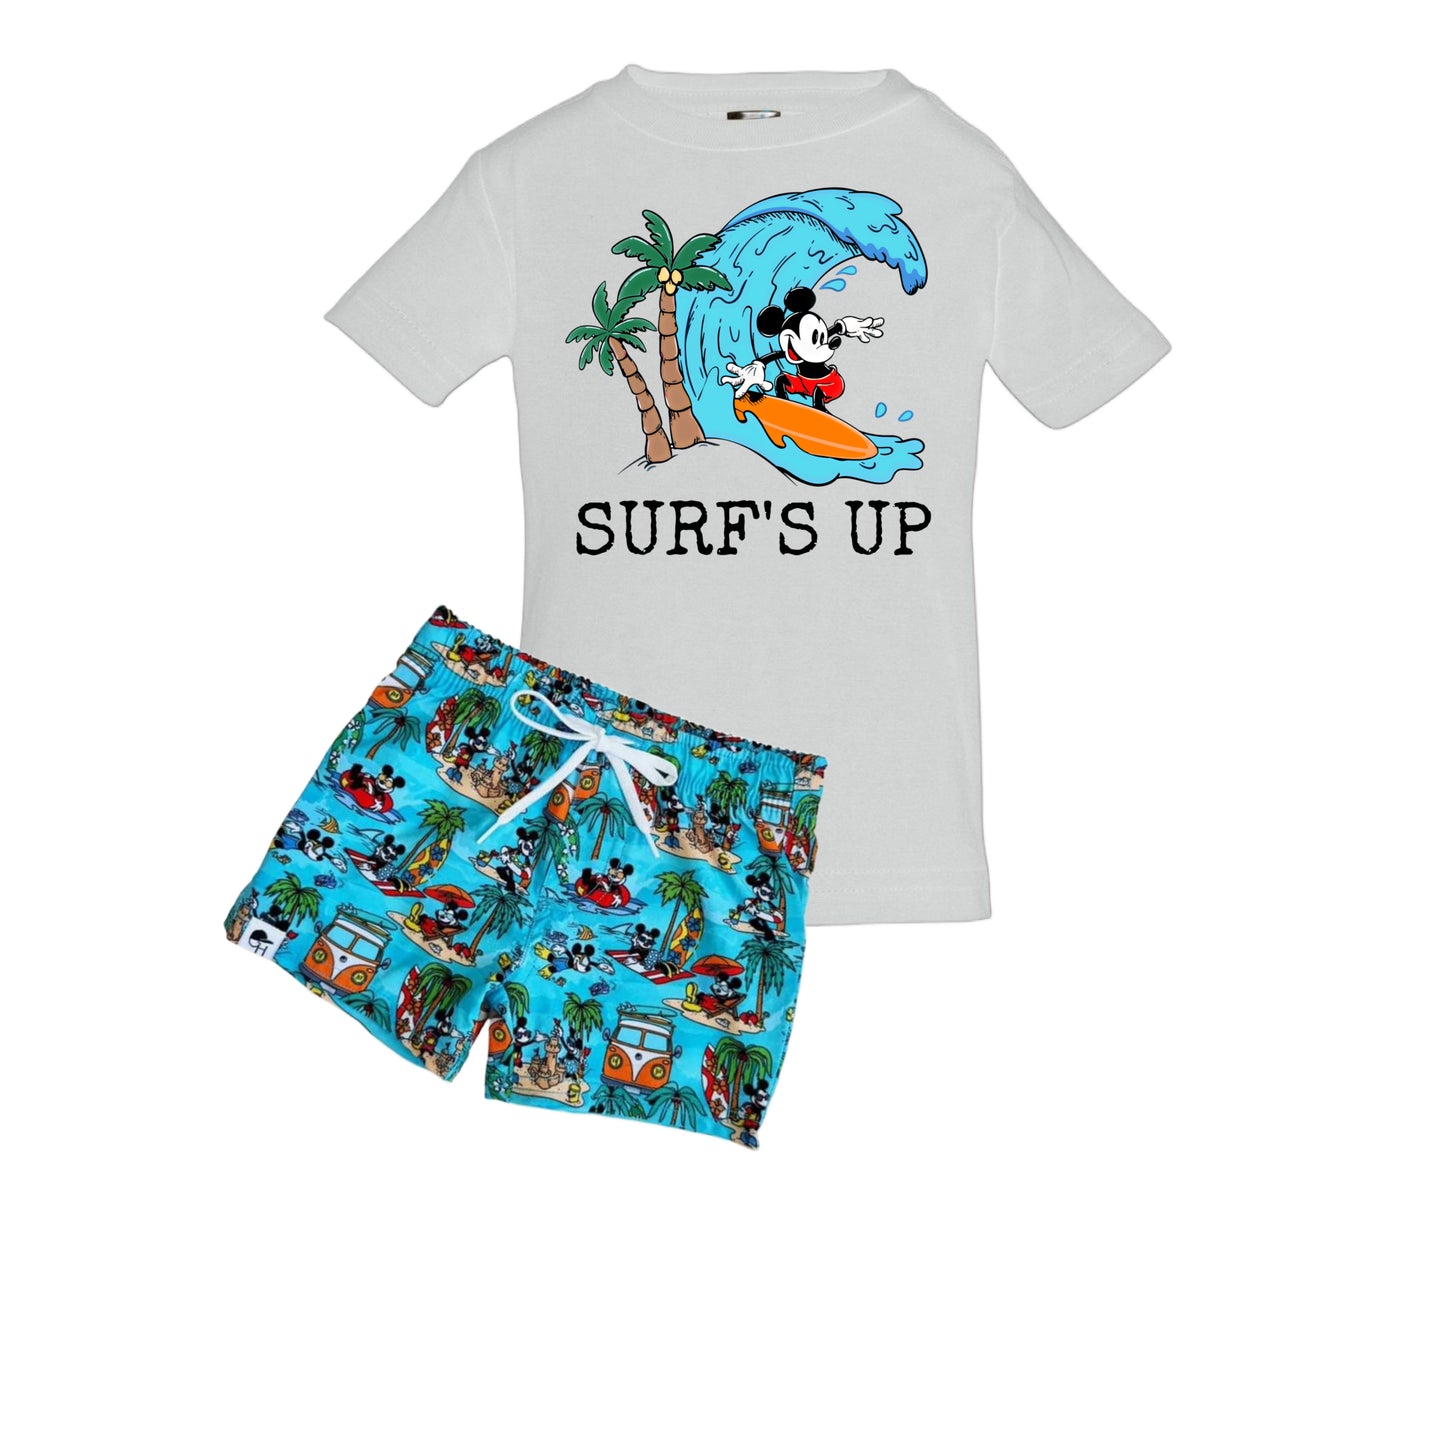 Surfs up( T-shirt only)